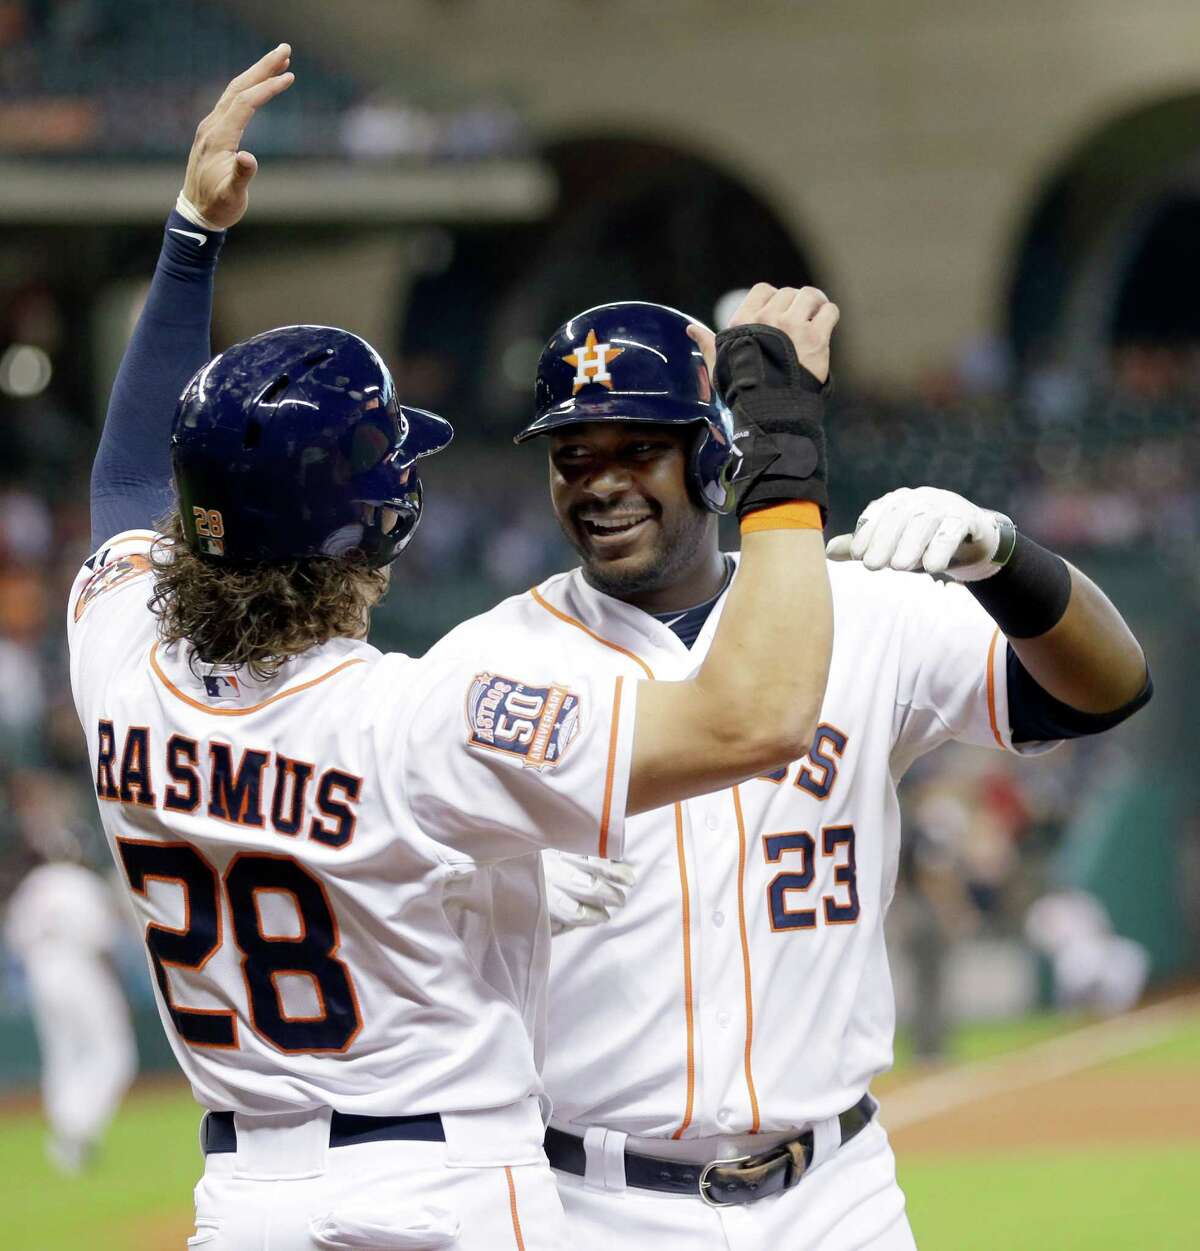 Houston Astros' Chris Carter (23) celebrates his two-run home run with Colby Rasmus (28) during the second inning of a baseball game against the Oakland Athletics on Tuesday, May 19, 2015, in Houston. (AP Photo/David J. Phillip)